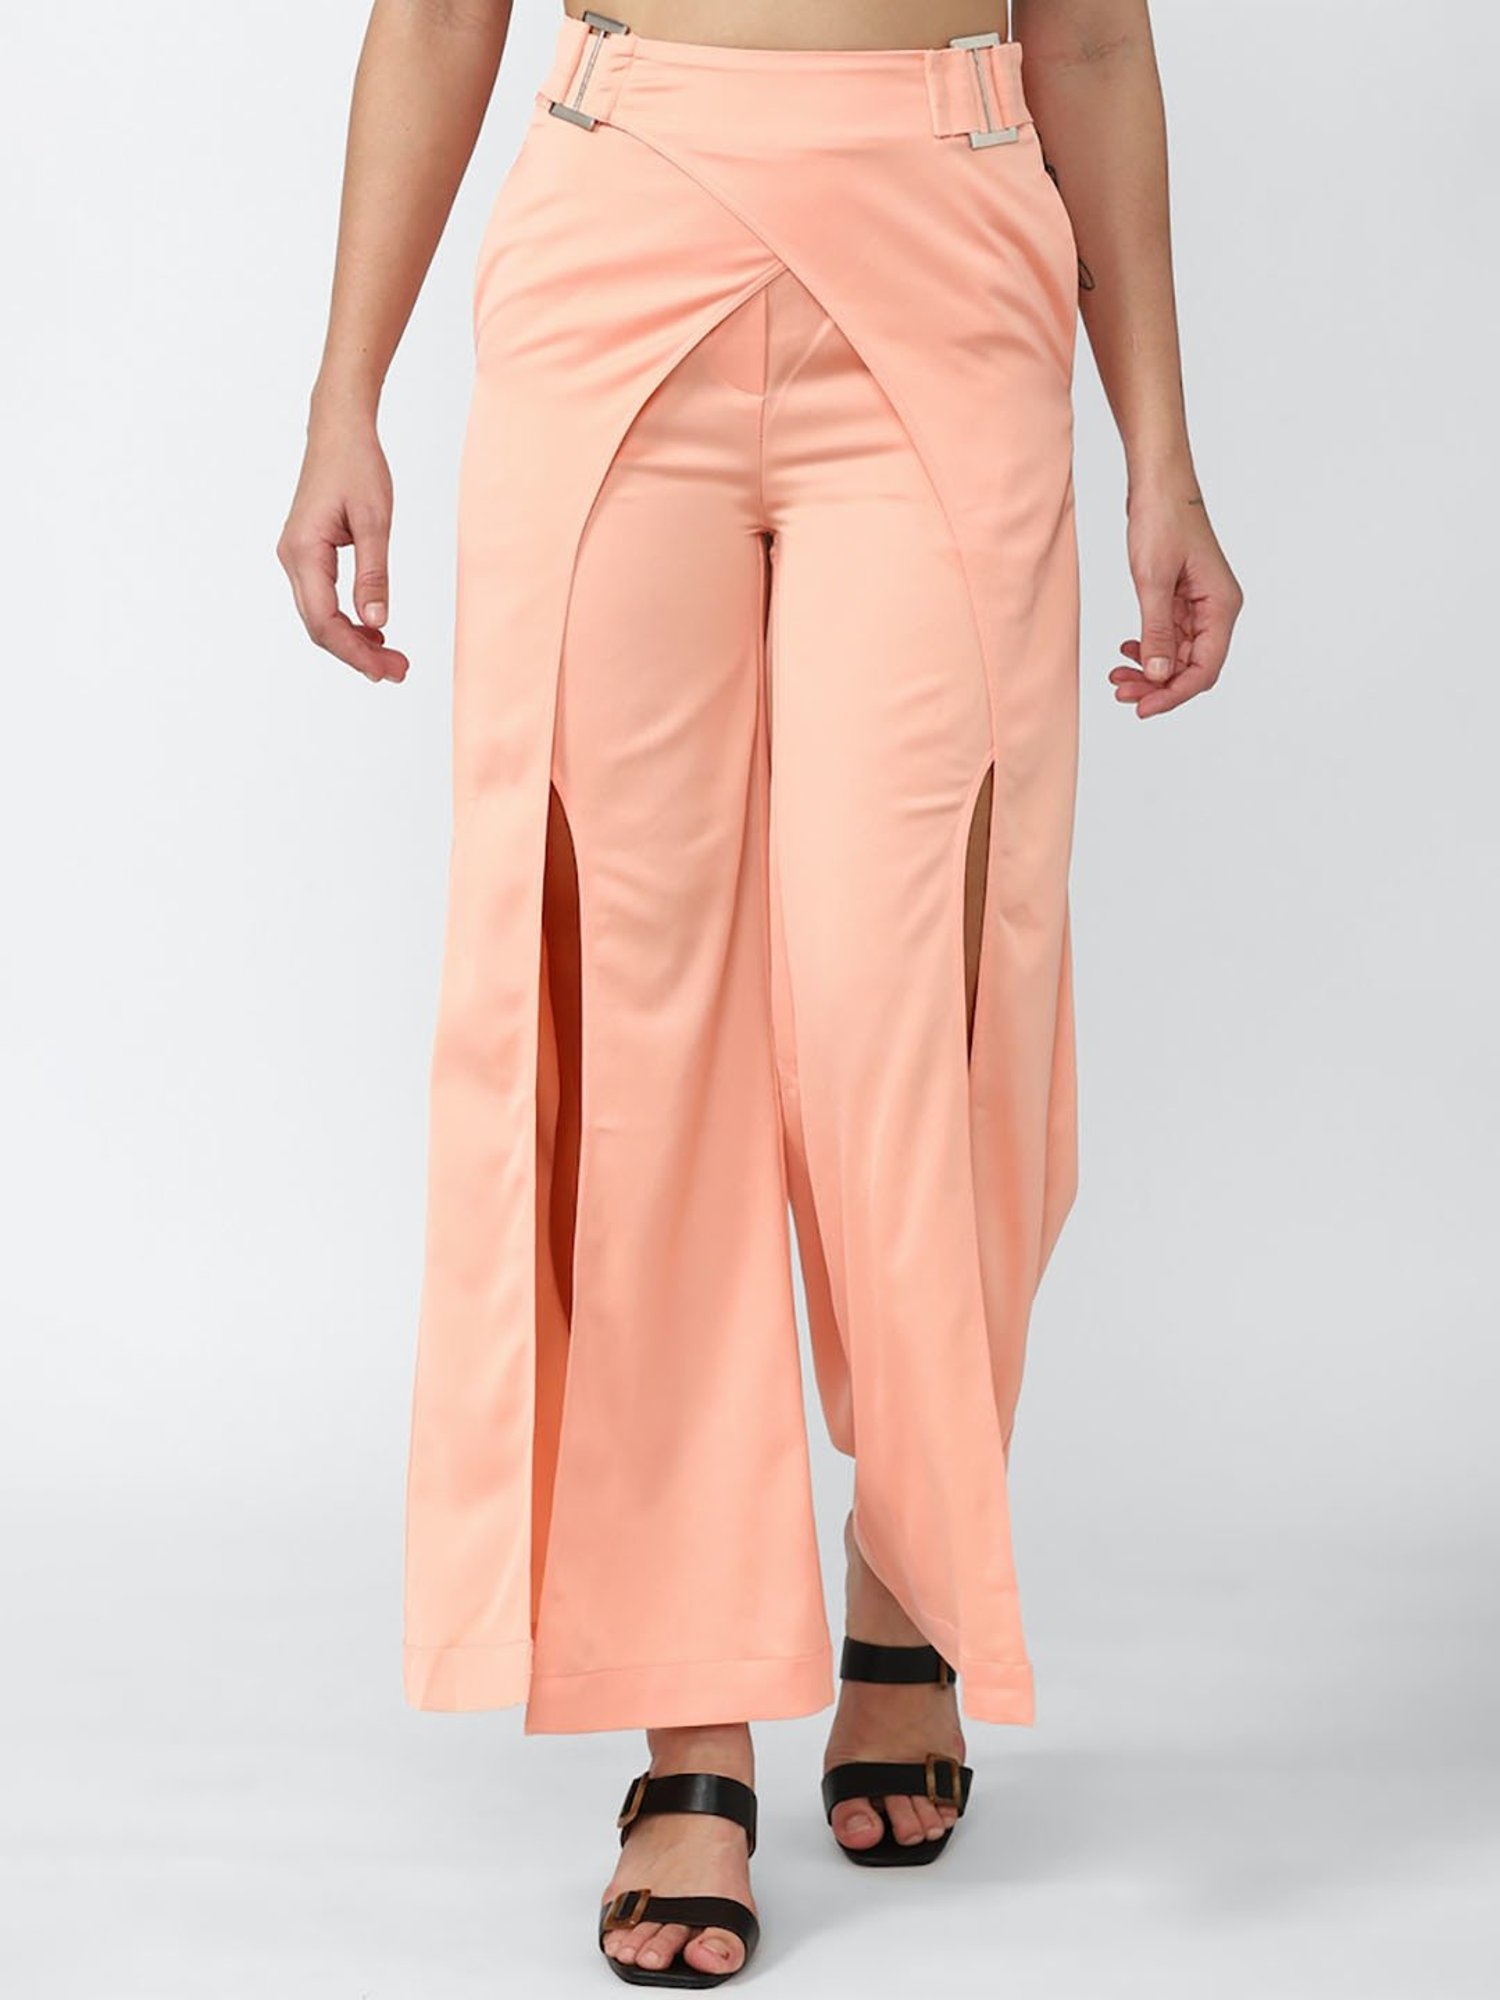 PLUS SIZE | square pants with slit, Women's Fashion, Bottoms, Other Bottoms  on Carousell